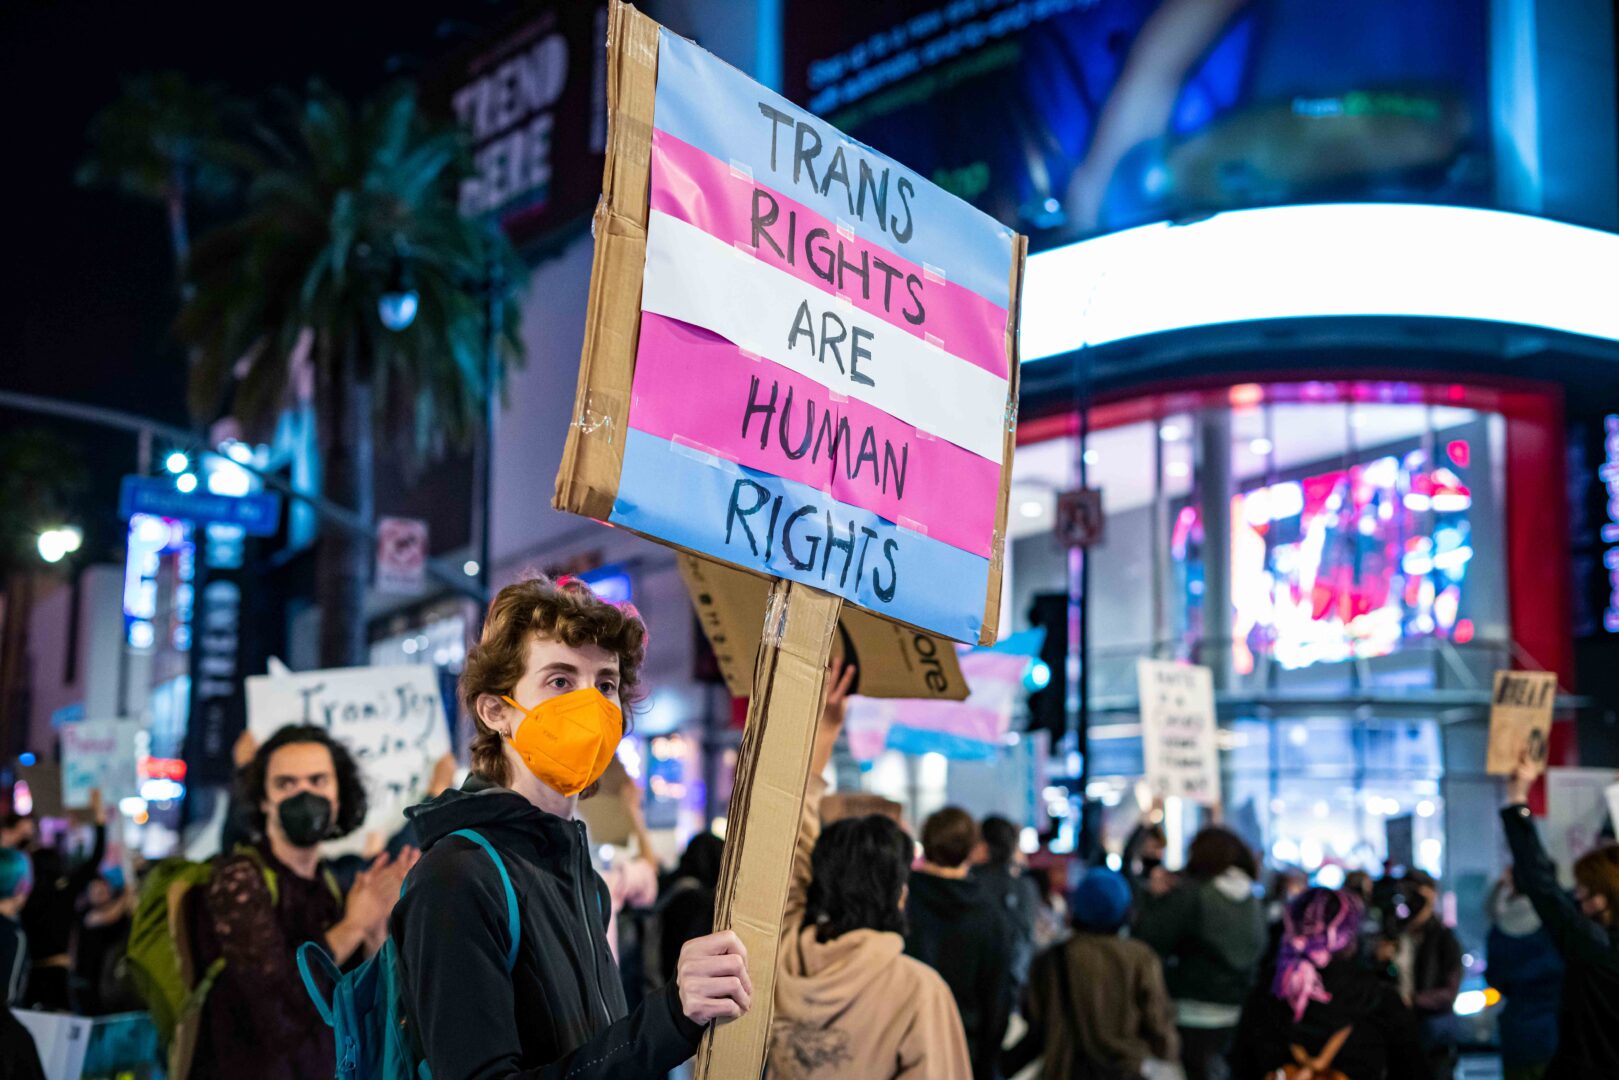 Activist with an orange N95 mask holding a sign with the trans flag saying "Trans Rights are Human Rights"